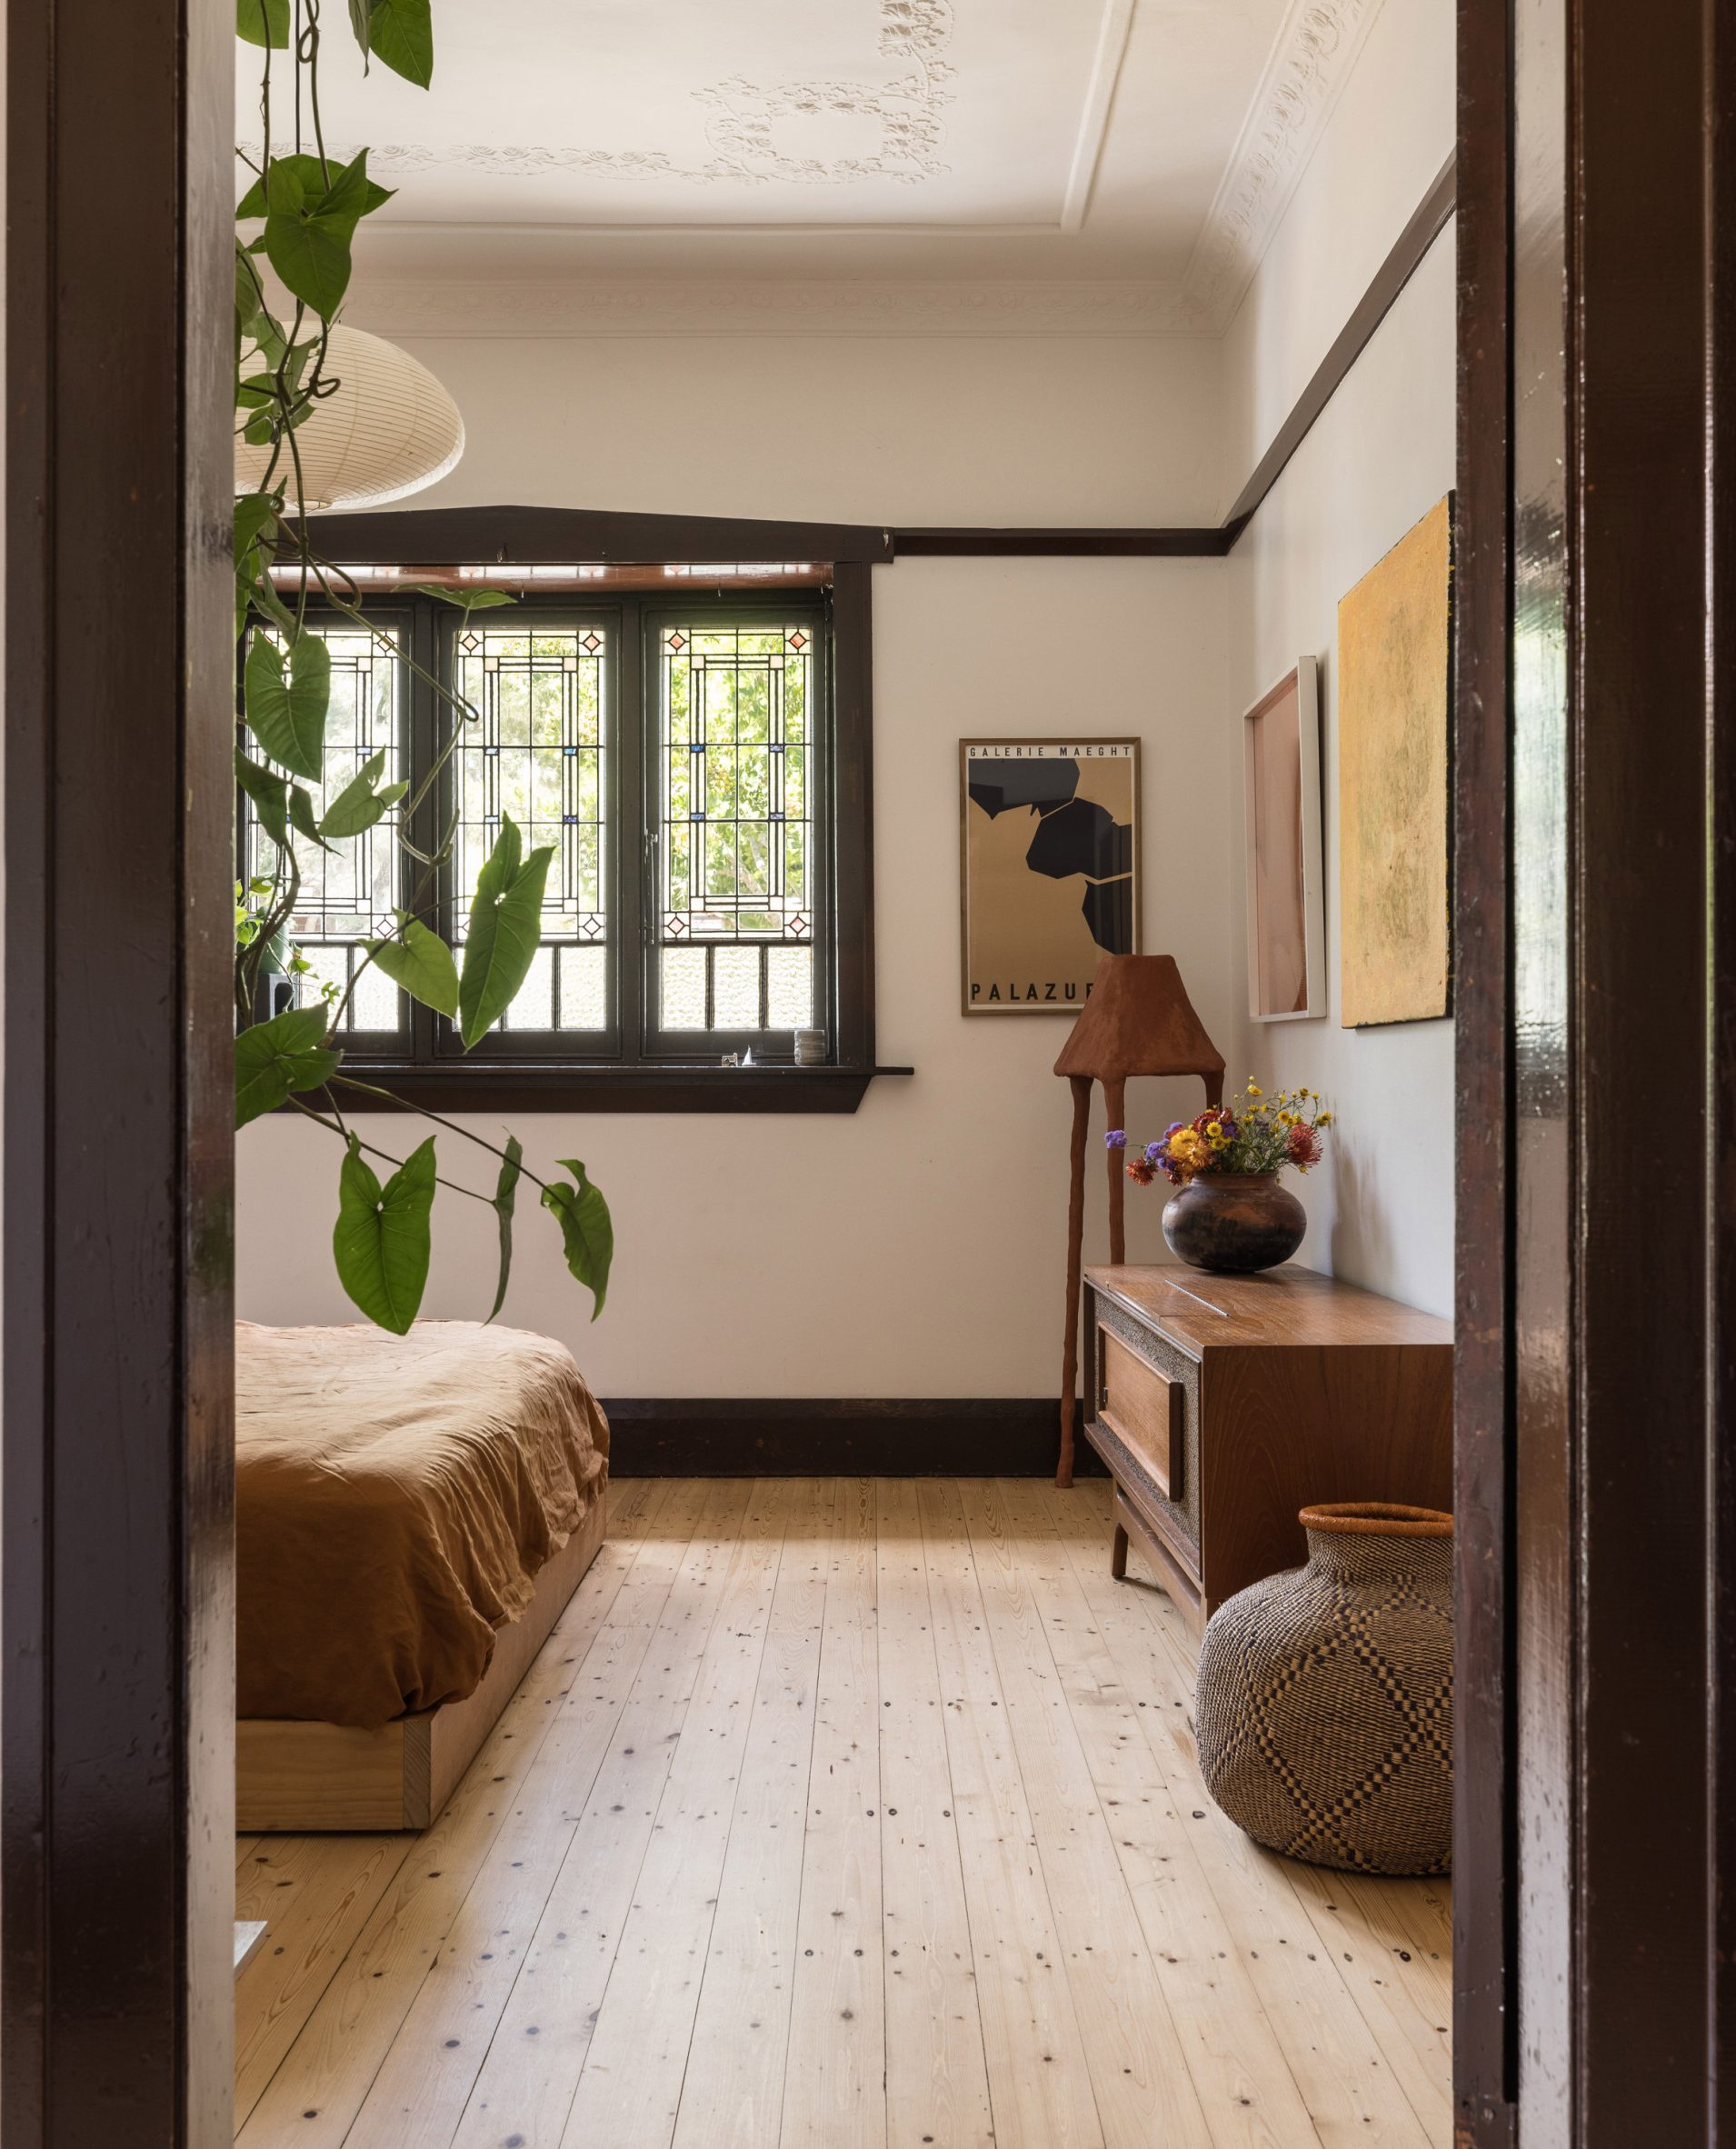 A bedroom with wood floors and dark timber window frames and picture rails